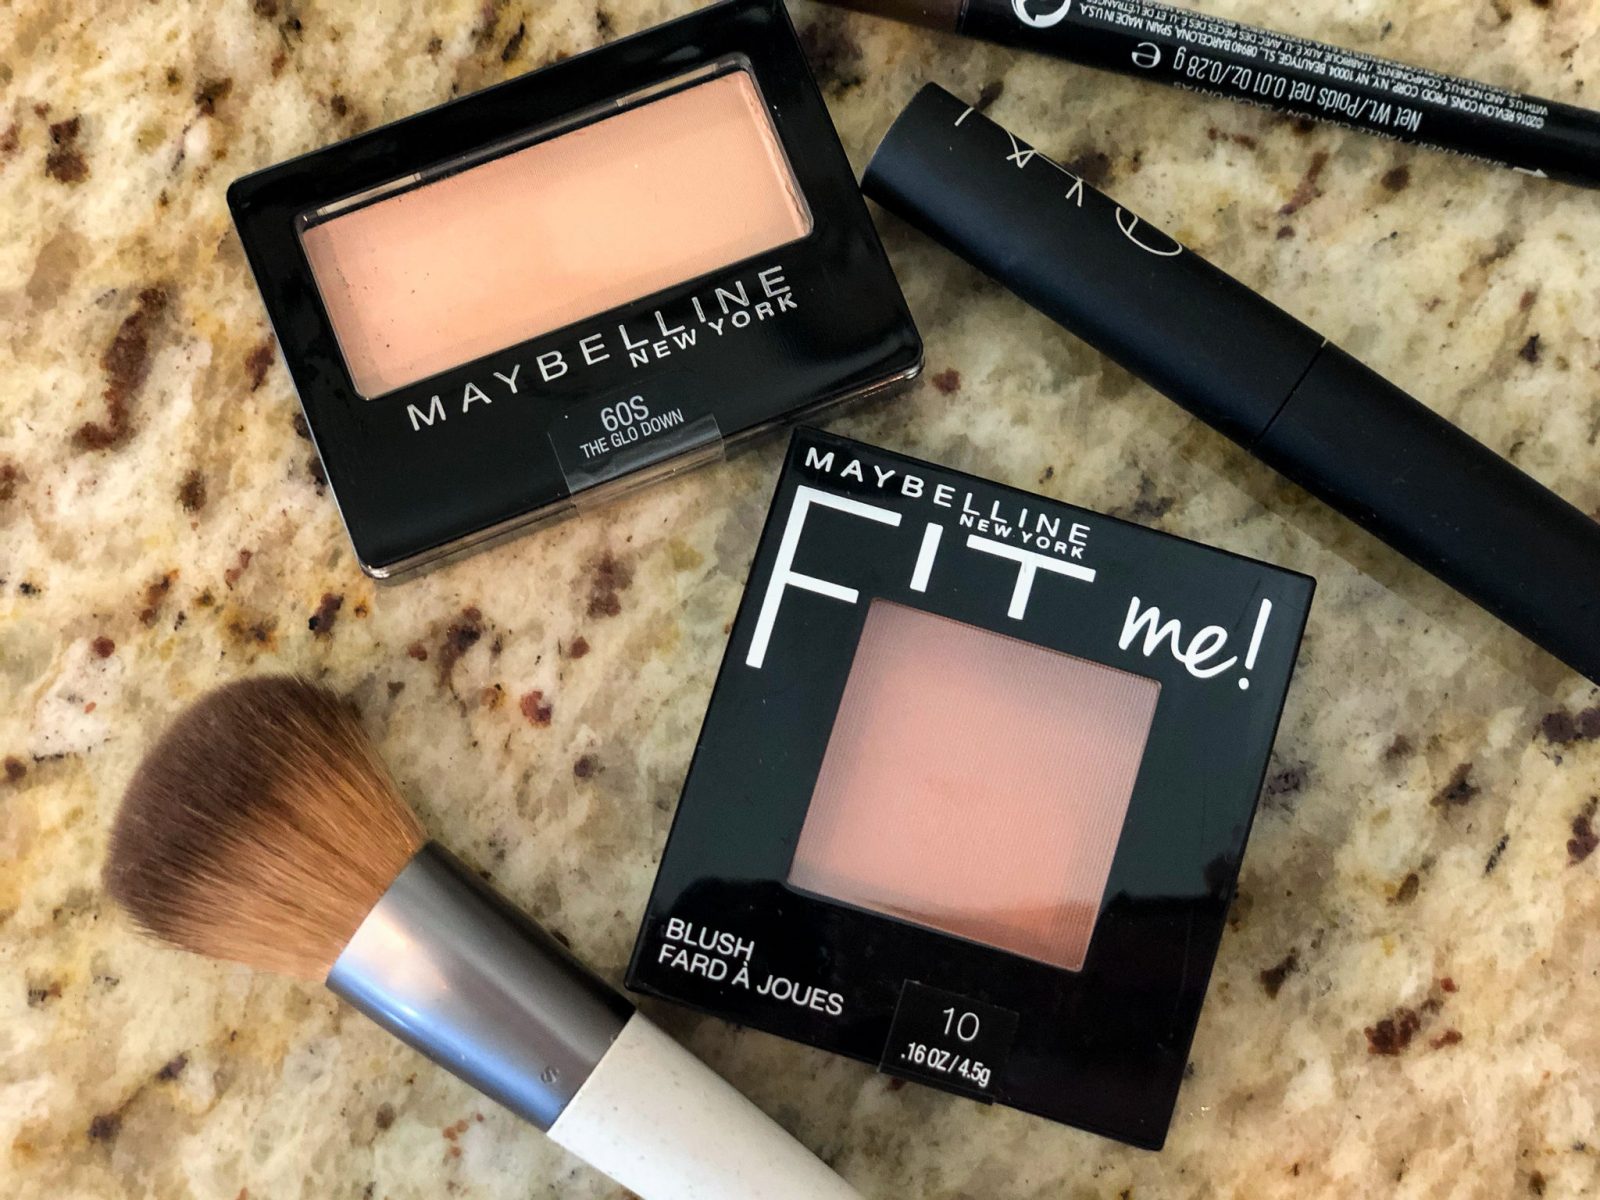 Cheap Maybelline Cosmetics - Products As Low As 99¢ At Publix on I Heart Publix 1